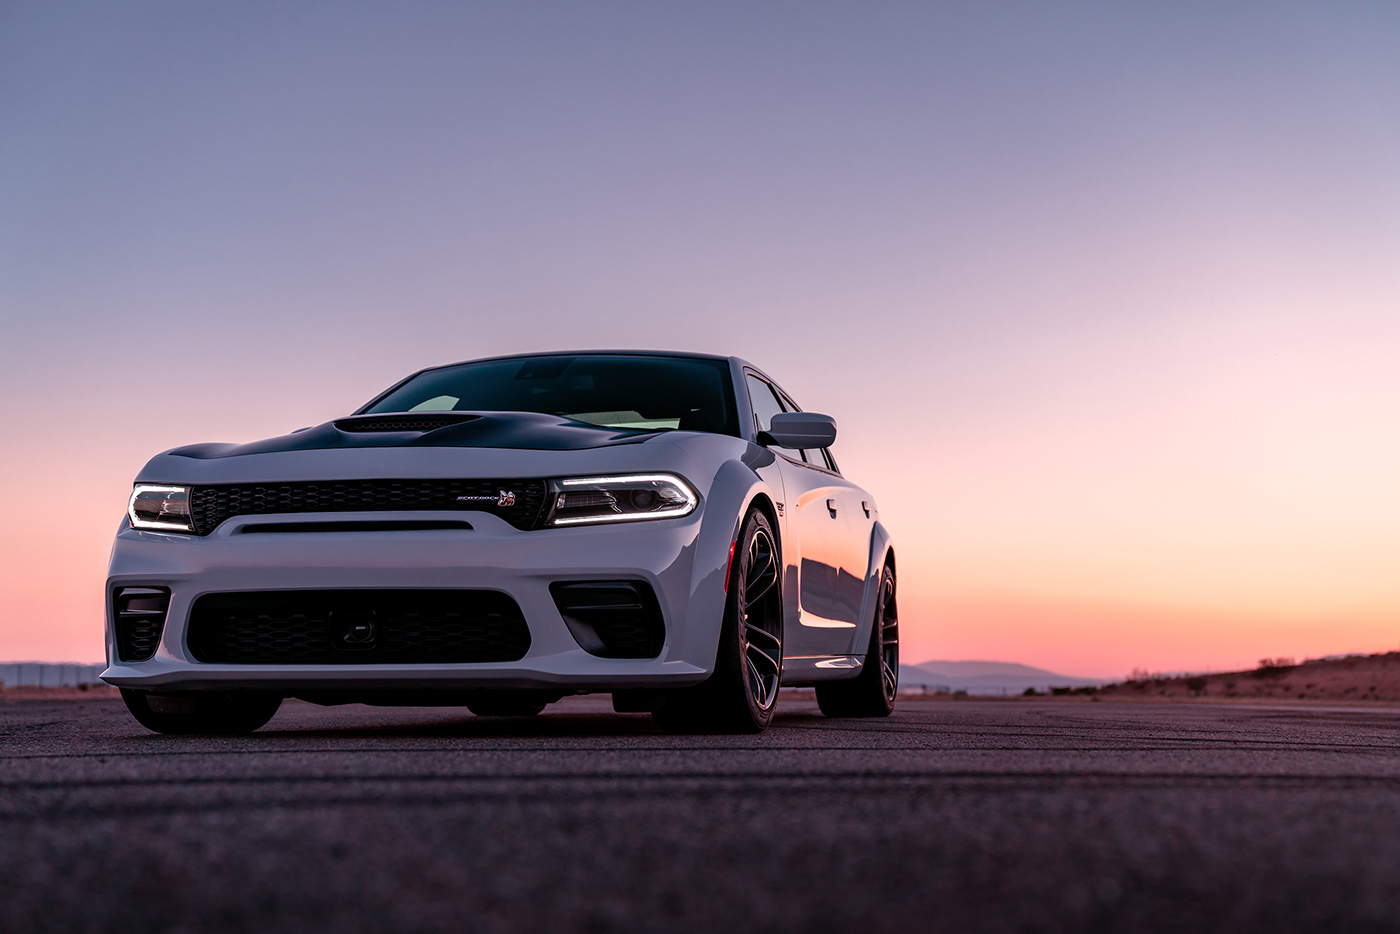 dodge srt hellcat widebody charger muscle car 707hp